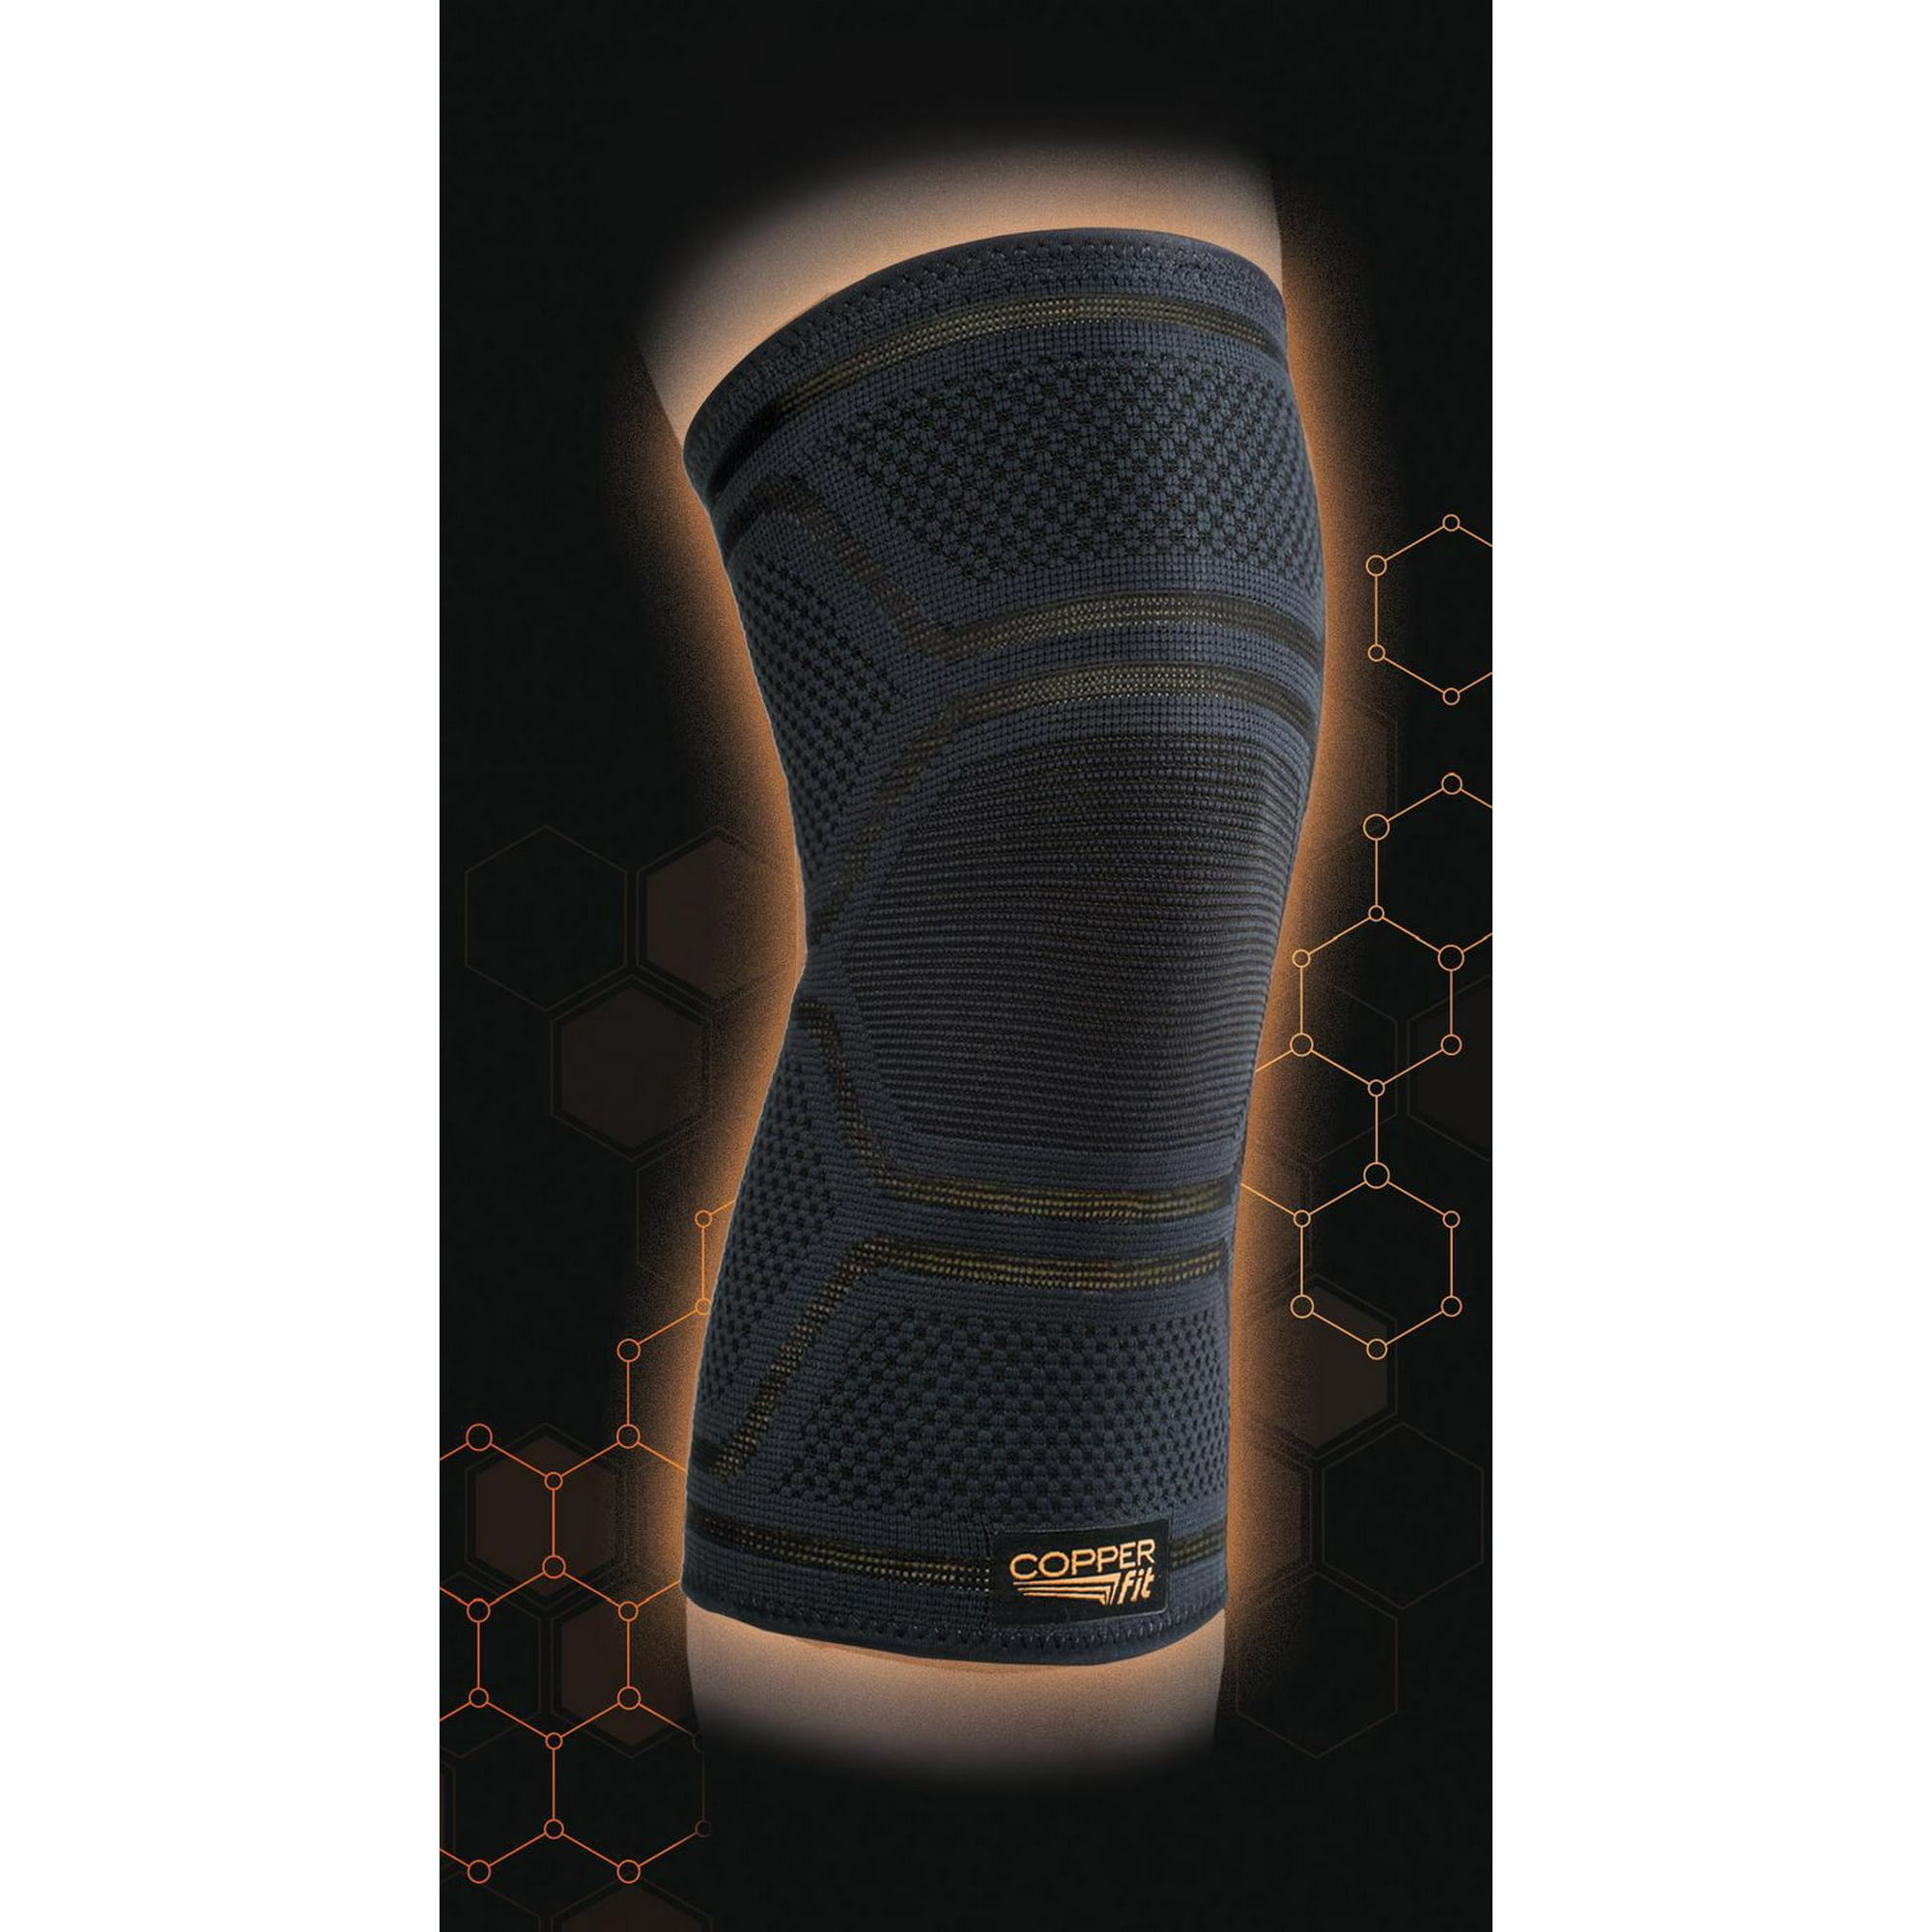 Copper Fit Ice Knee Sleeve Infused With Cooling Action & Menthol - S/m :  Target